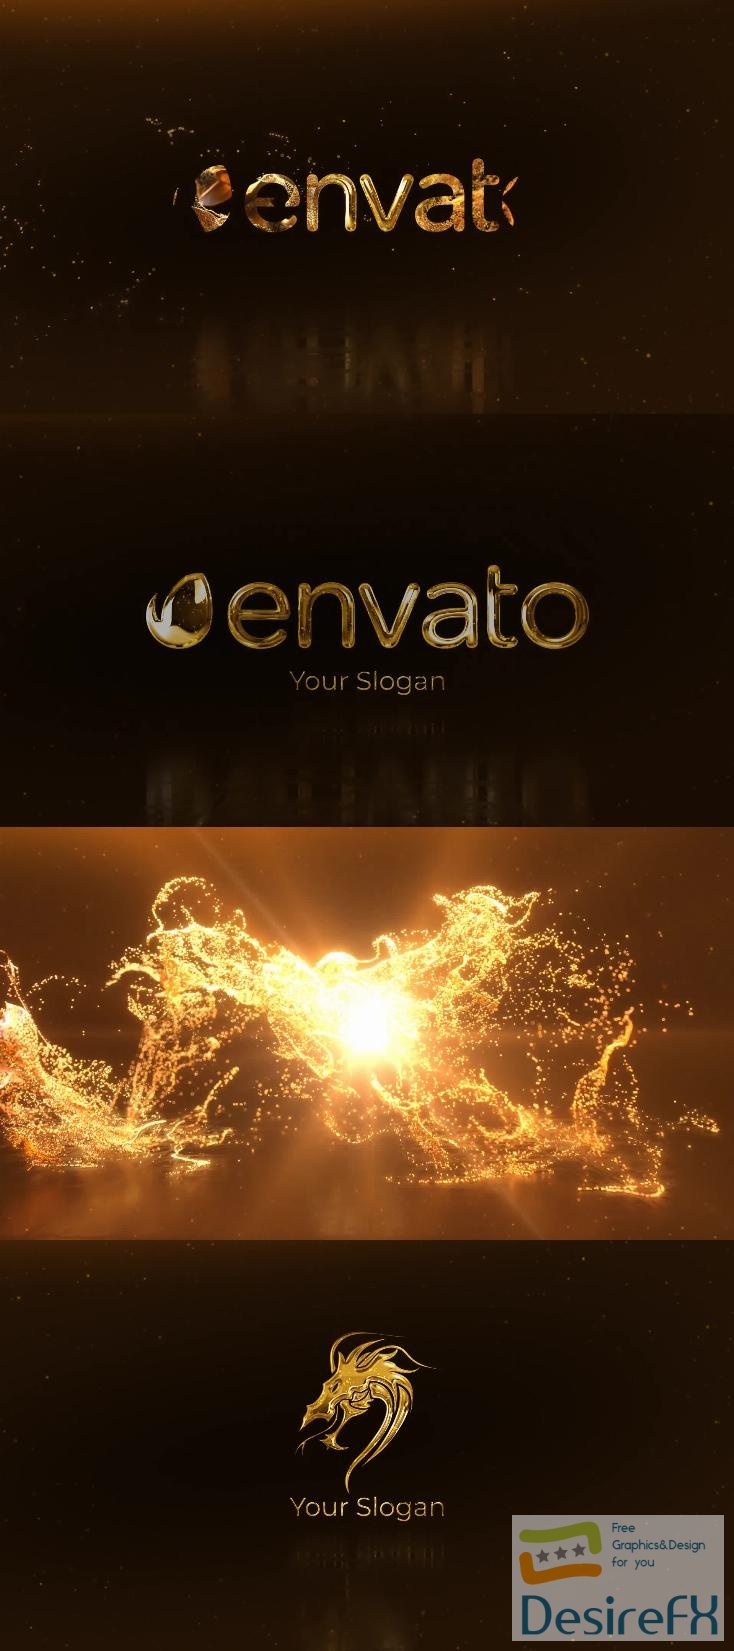 Videohive Gold Dust Explosion Logo 39955598